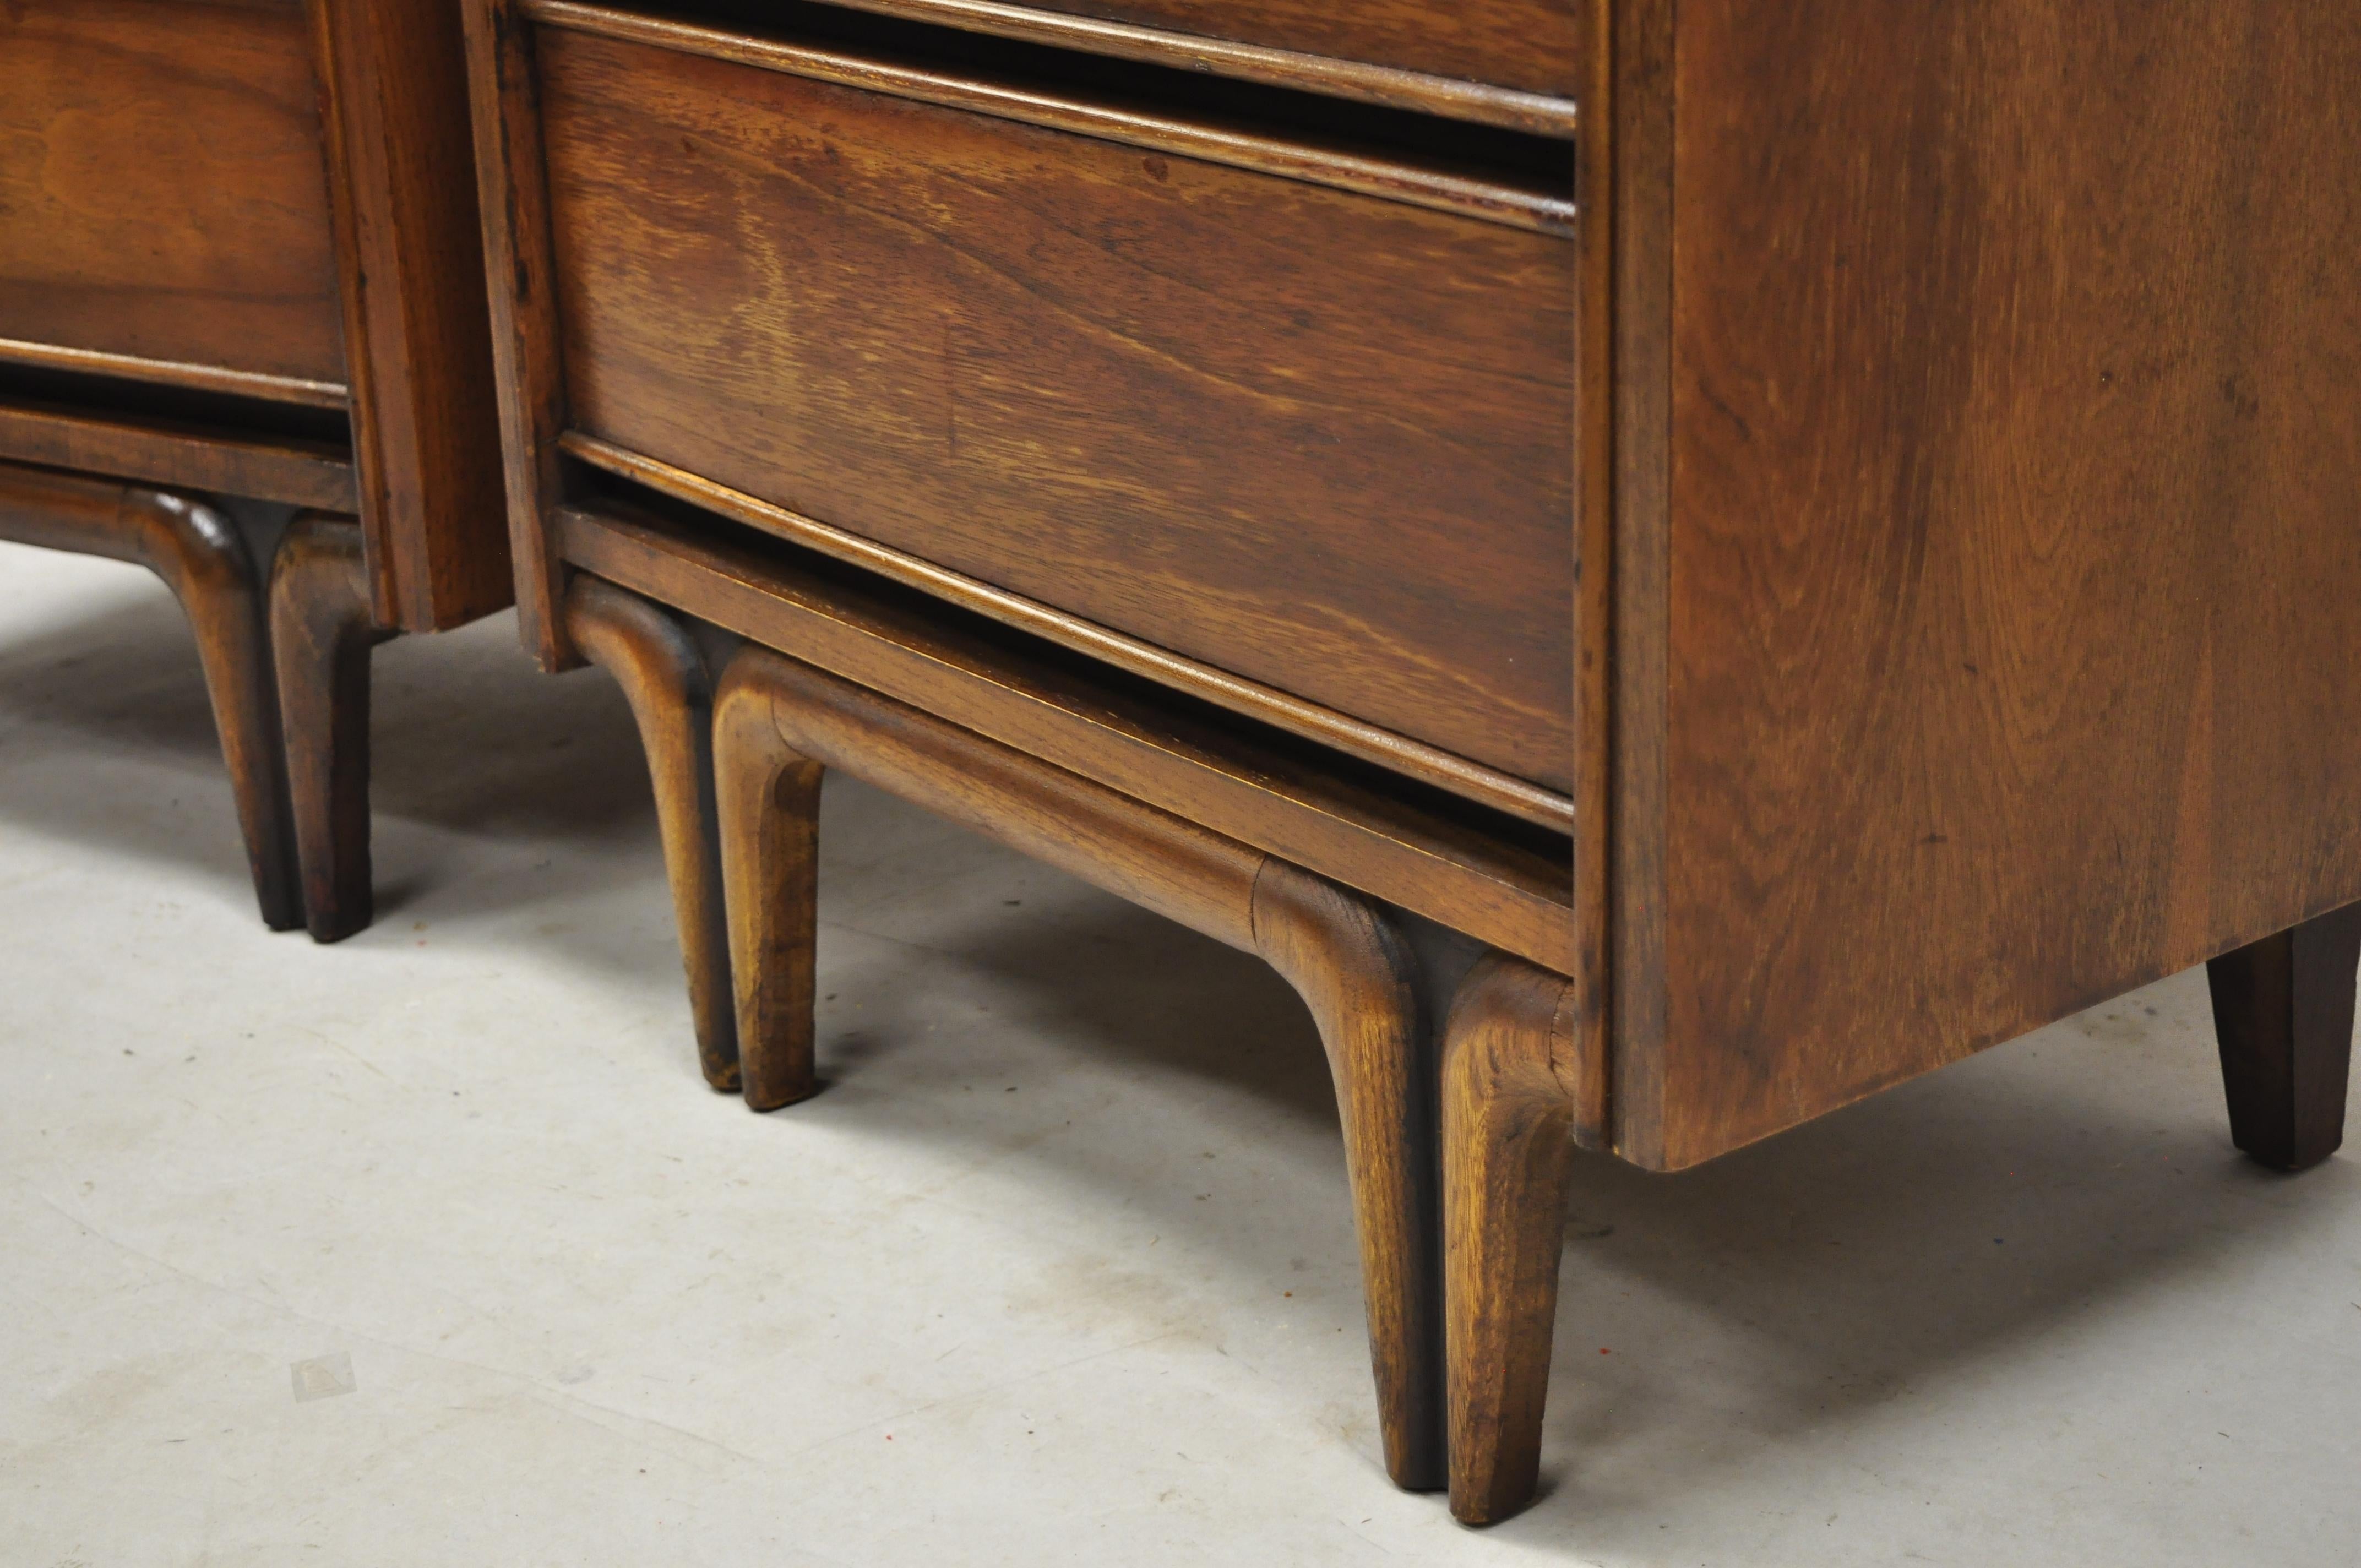 American Pair of Mid-Century Modern Sculpted Walnut V-Leg Nightstands Bedside End Tables